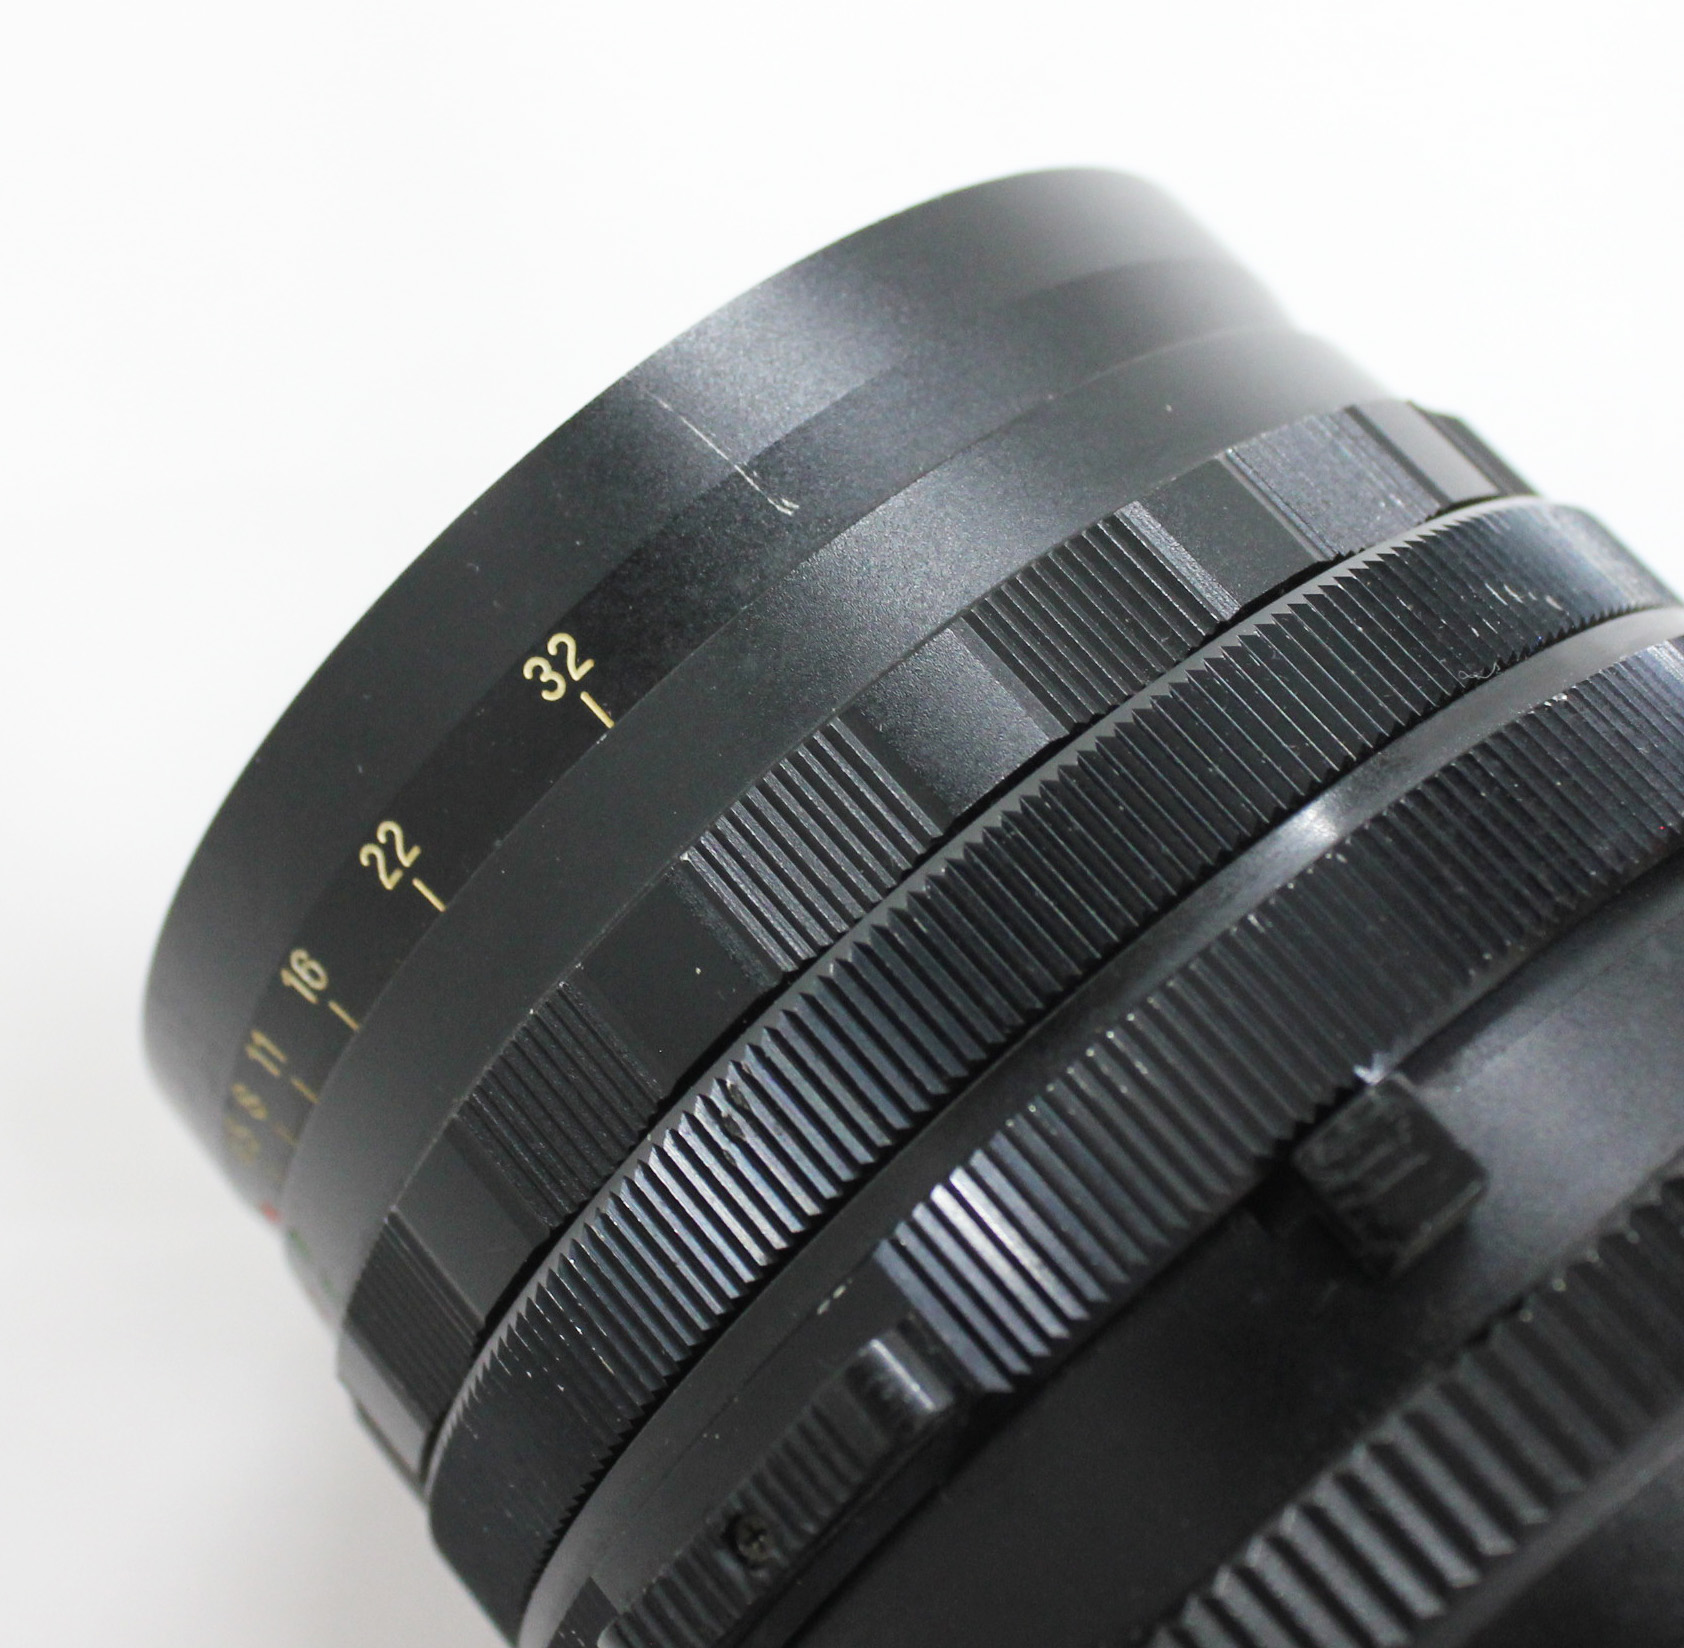  Mamiya Sekor C 50mm F/4.5 Wide Angle Lens for RB67 Pro S SD from Japan Photo 6